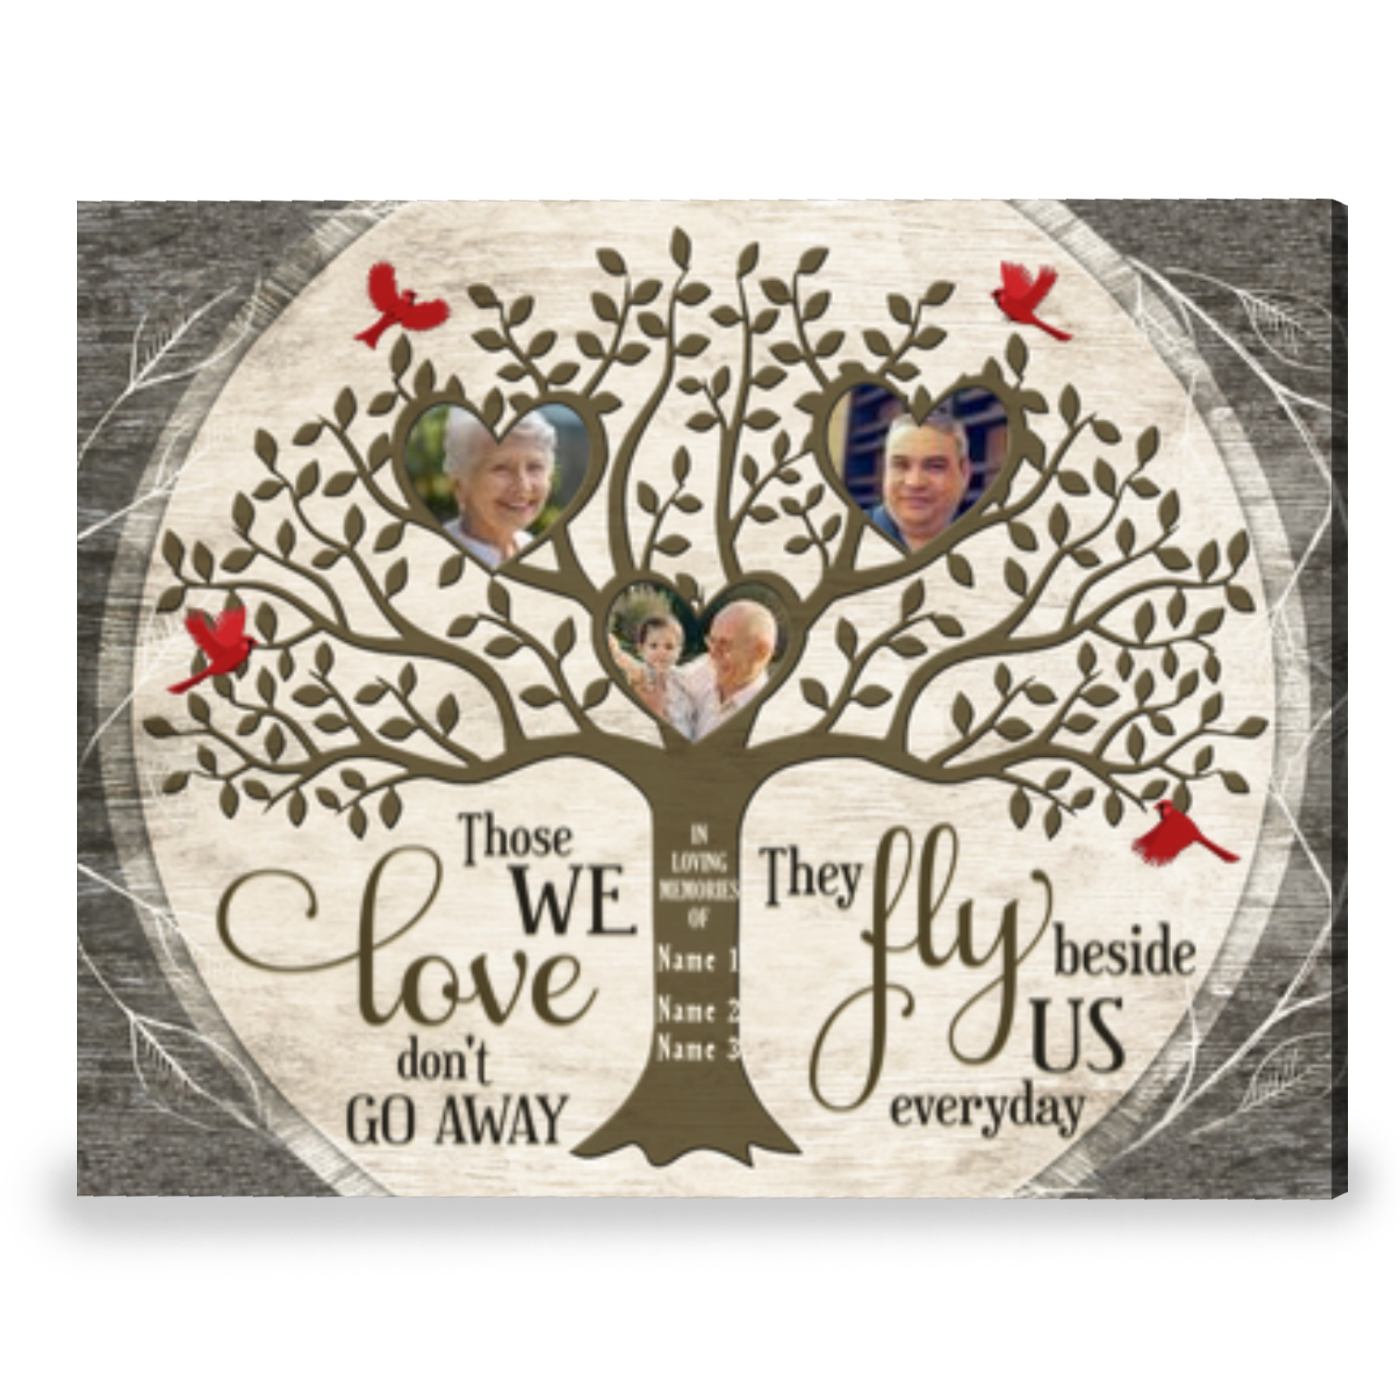 Extra Large Family Tree Wall Art / Personalized Gift / Photo